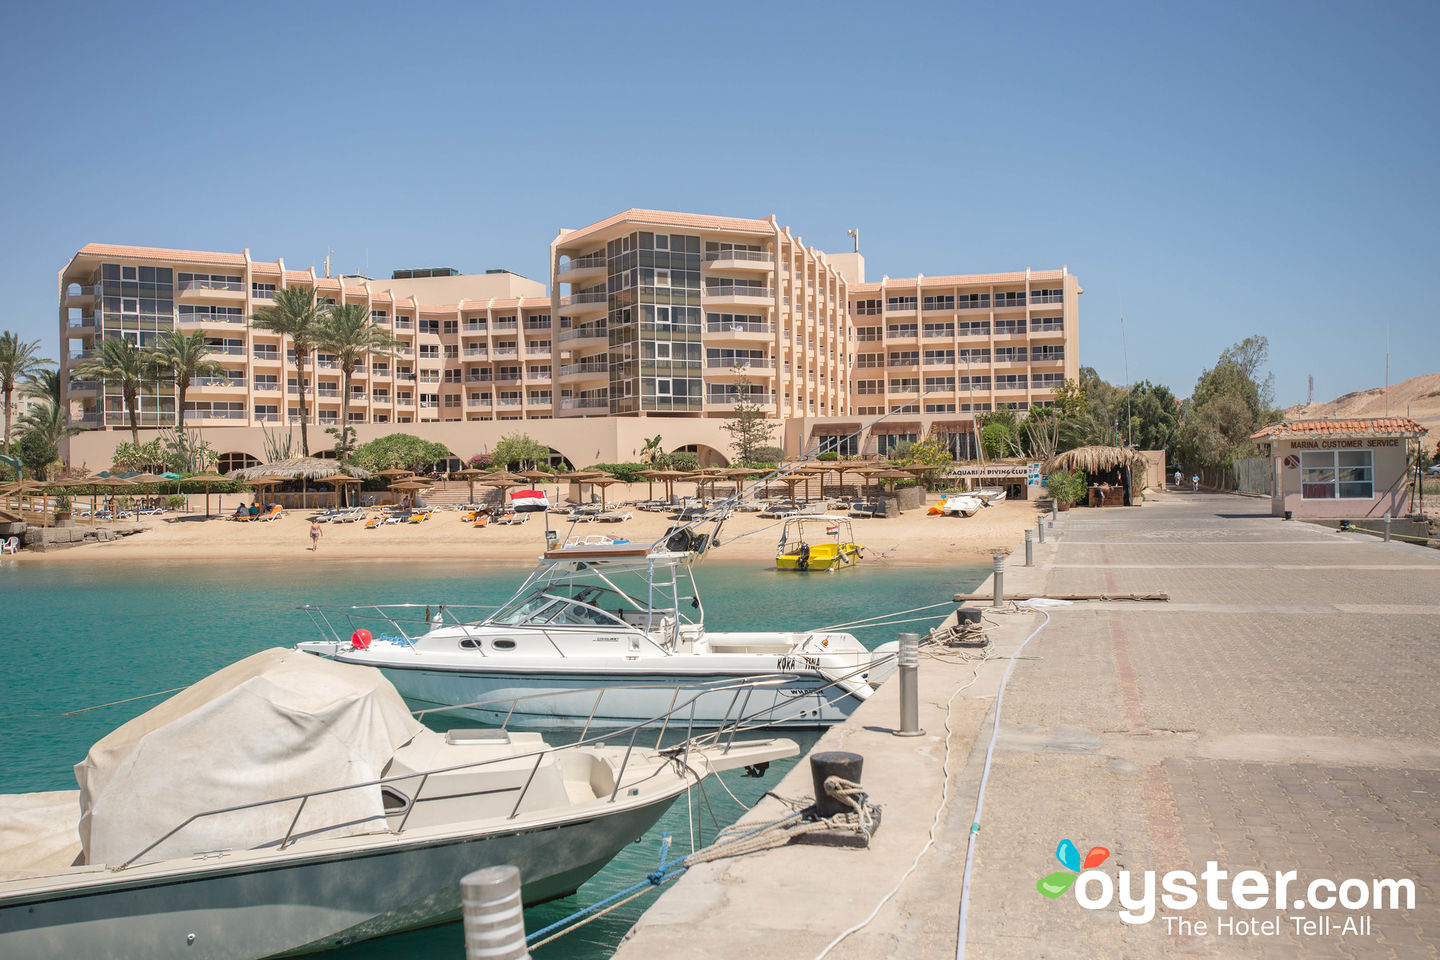 Hurghada Marriott Beach Resort Review: What To REALLY If You Stay